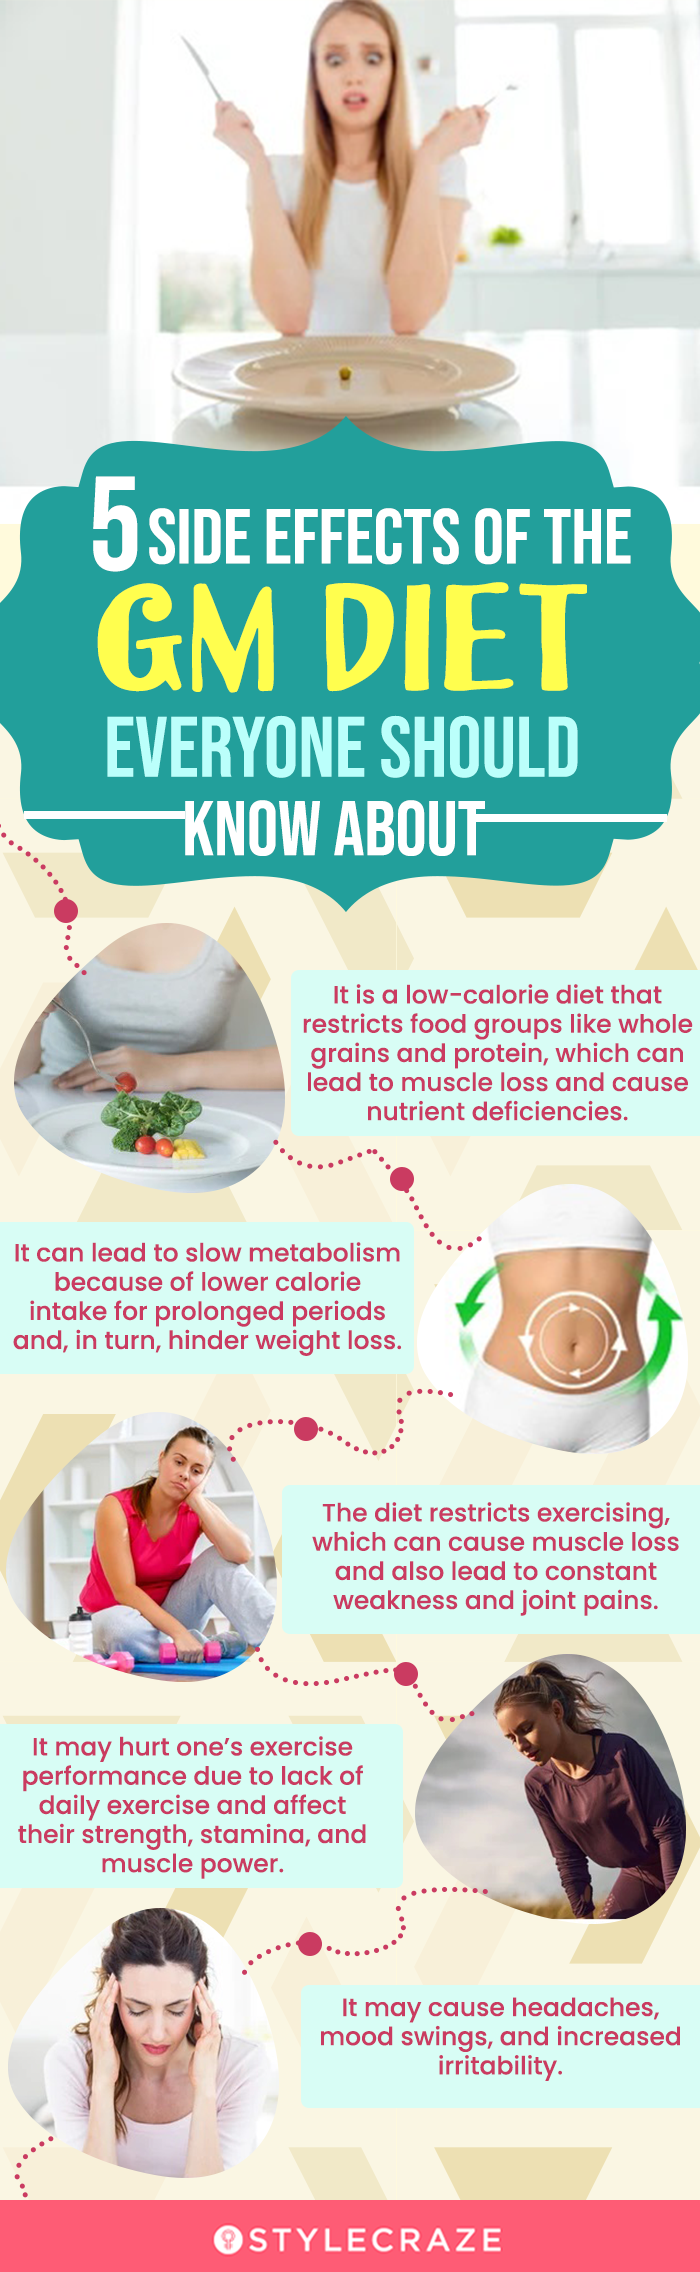 5 side effects of the gm diet everyone should know about (infographic)